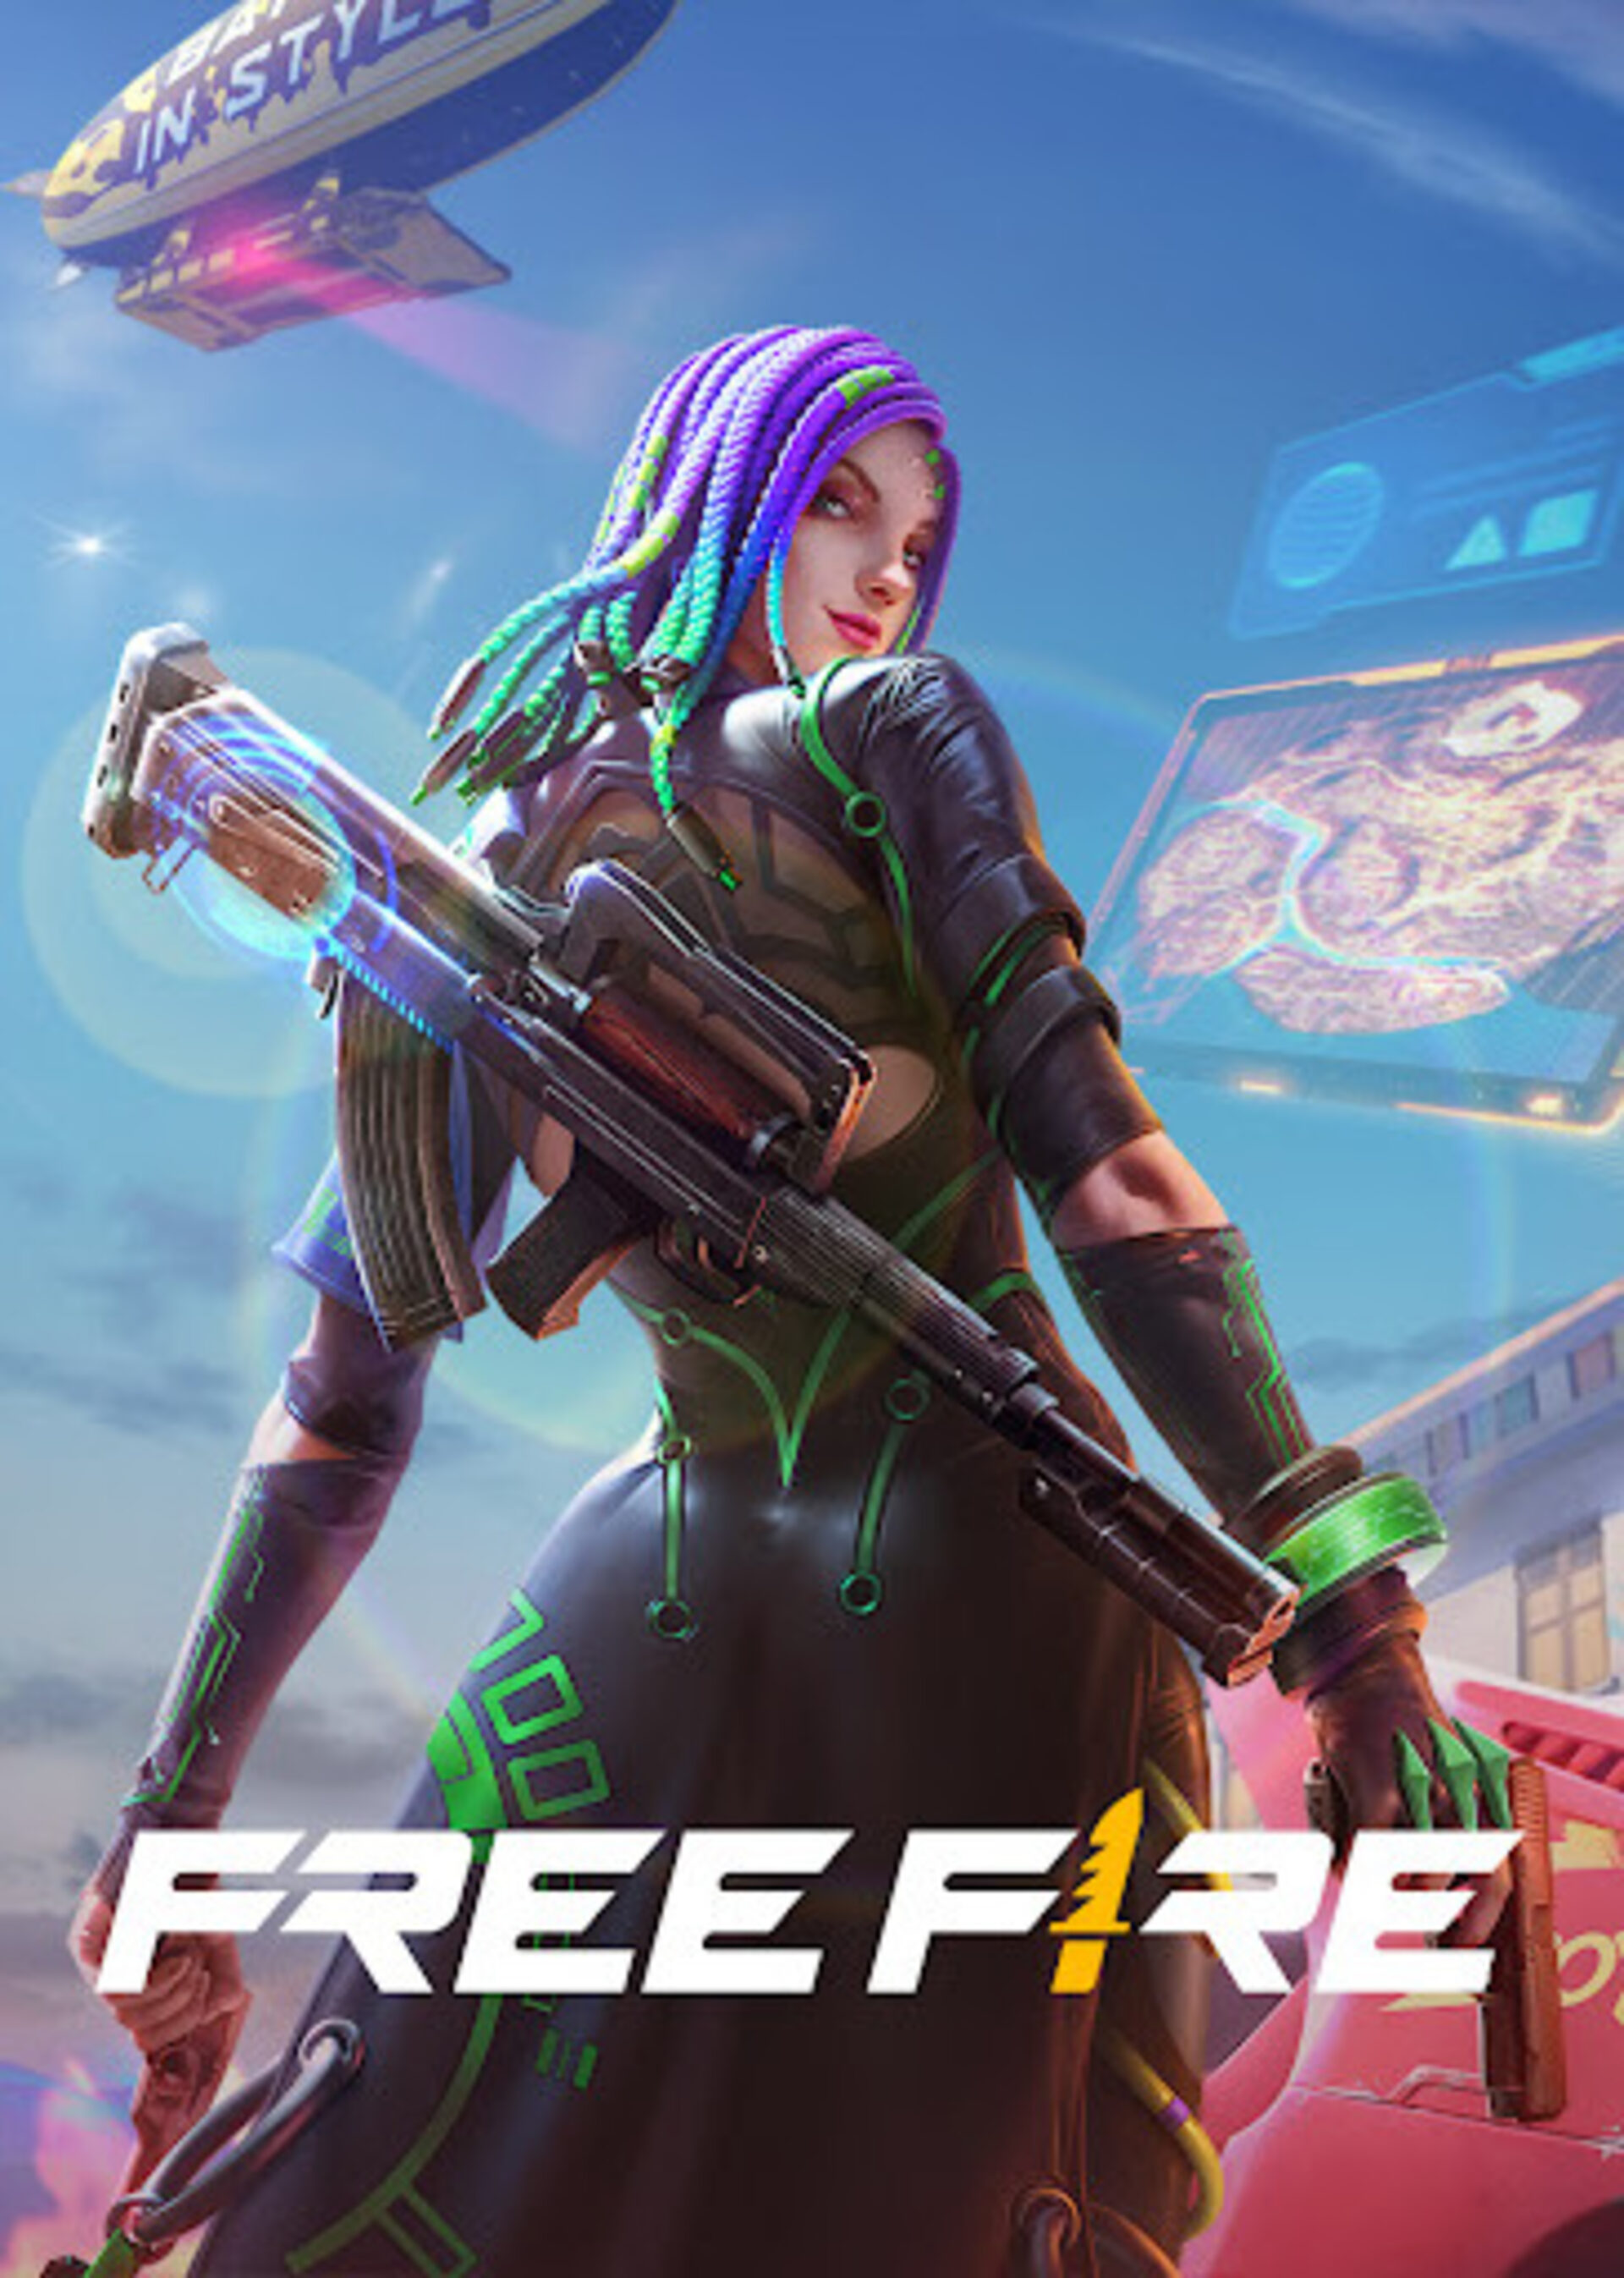 Recarga Free Fire - Product Information, Latest Updates, and